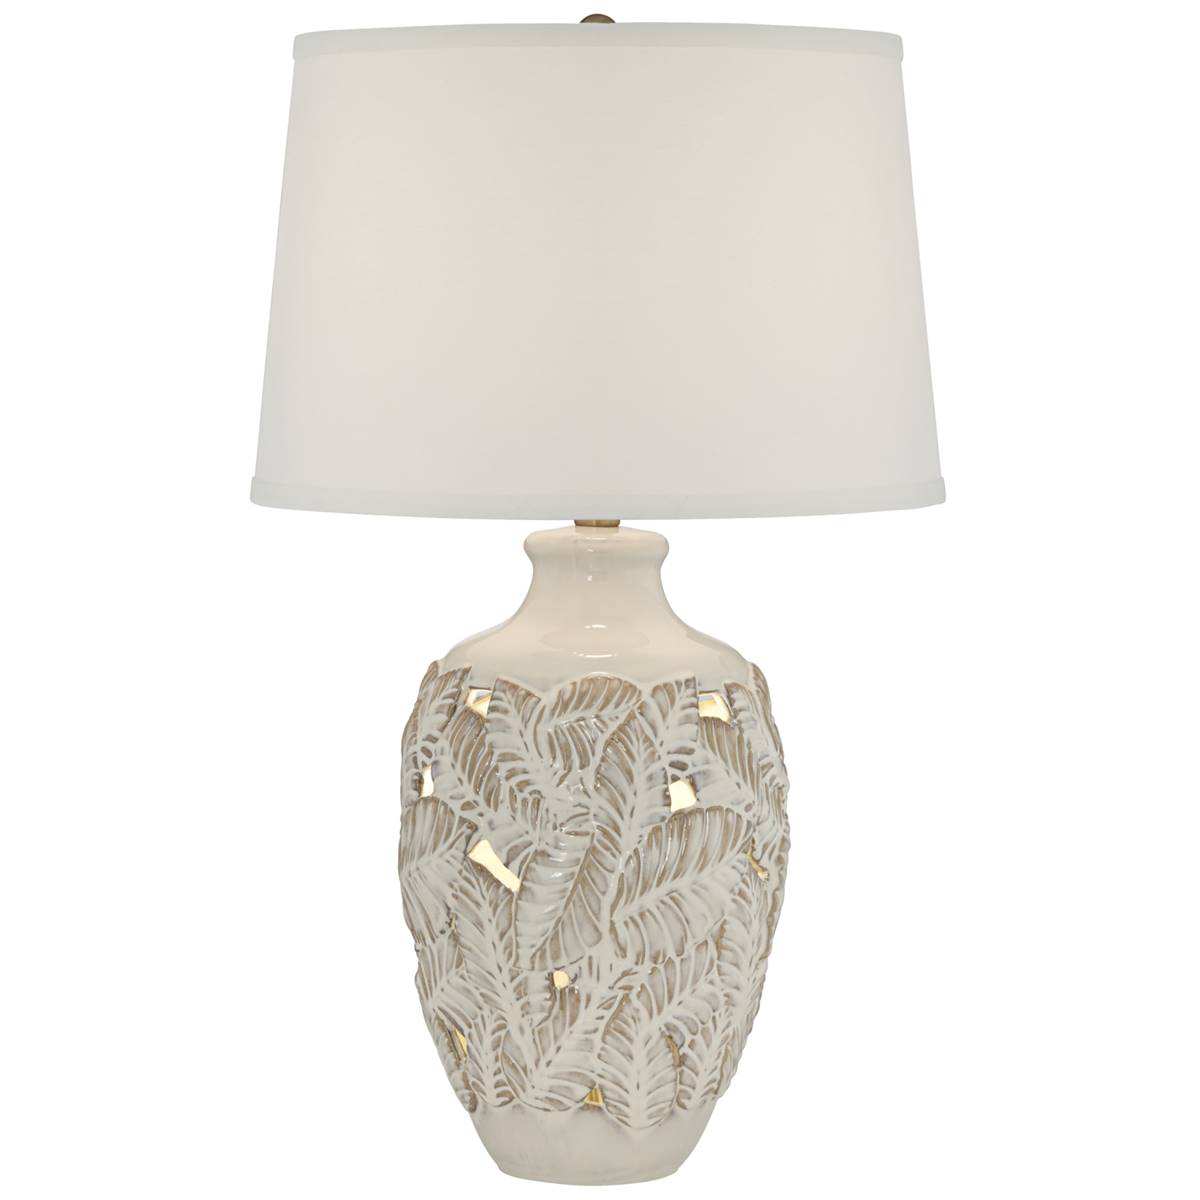 Pacific Coast Lighting Palm Bay 26in. Almond Table Lamp